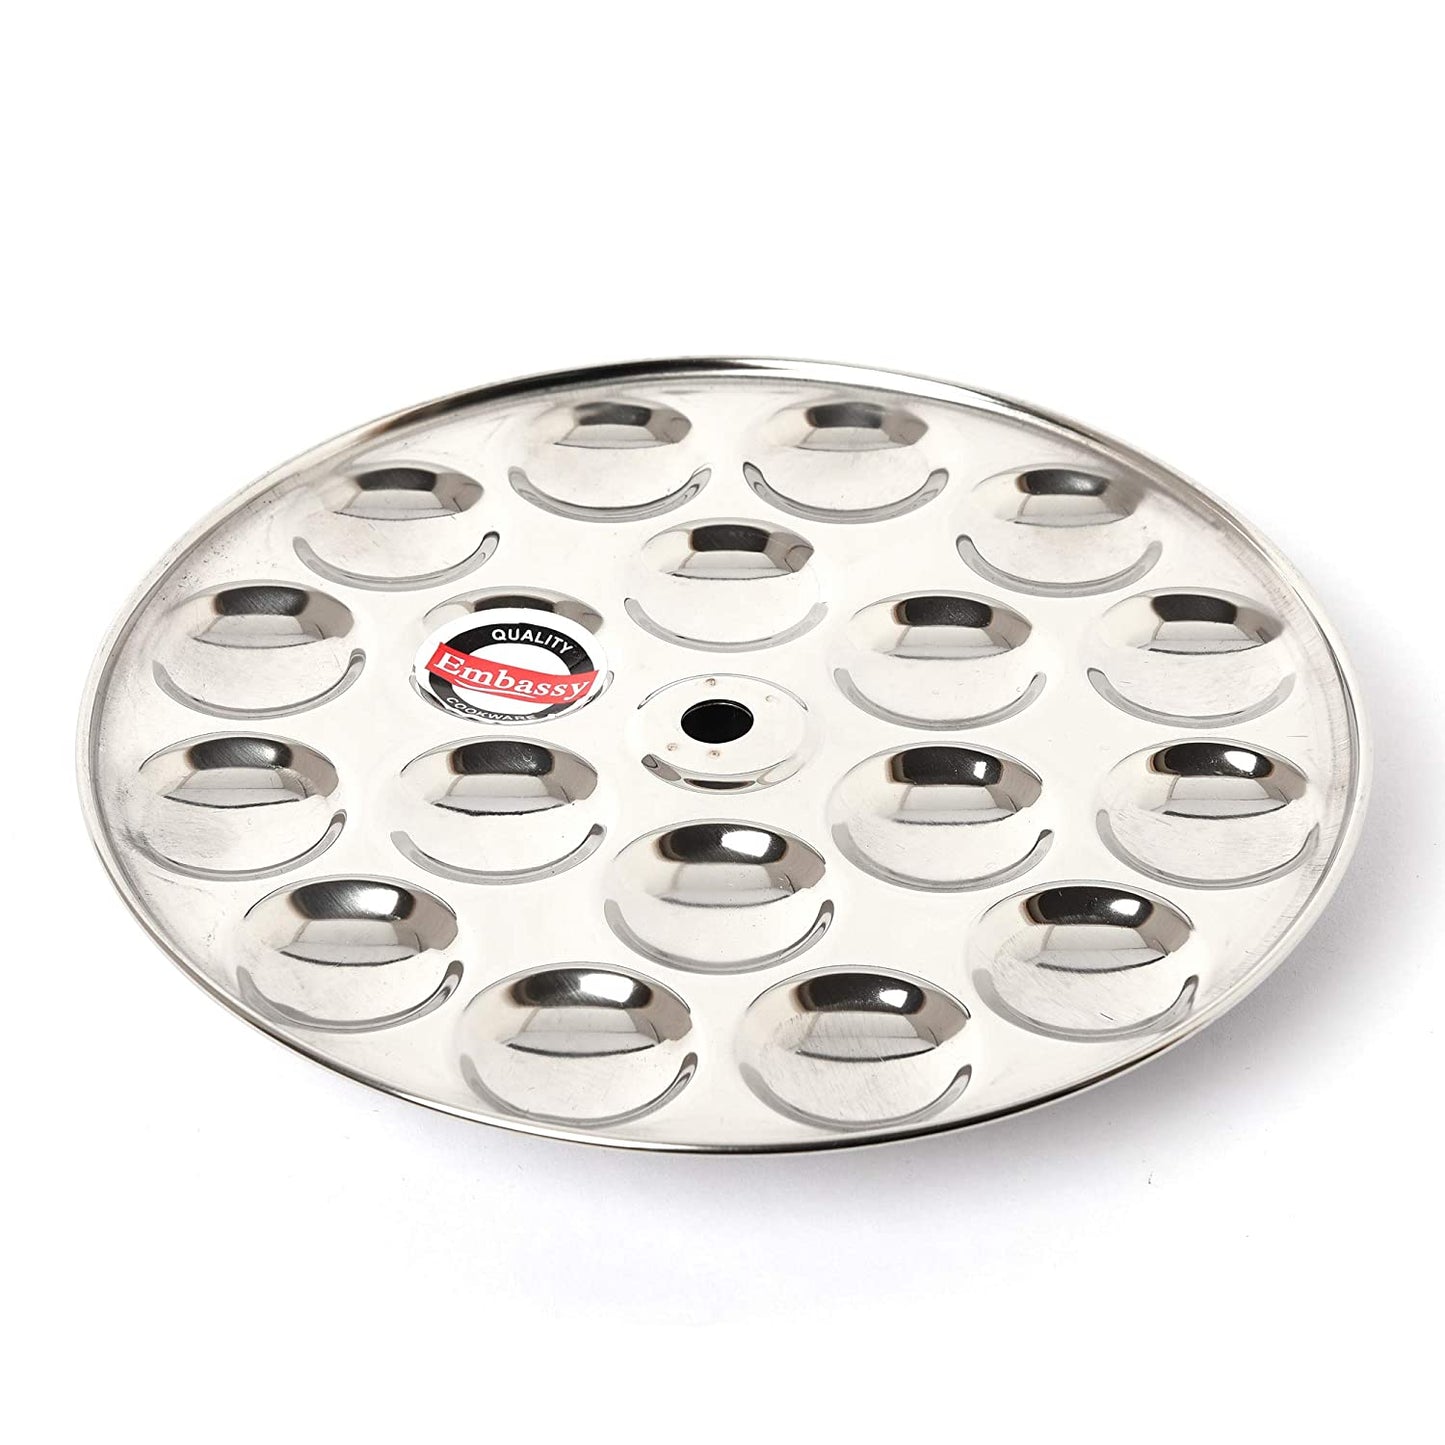 Embassy Stainless Steel Special Mini Idly Plate Without Stand (Thick Gauge), 19.4 cms, 1-Piece, 18 Idly/Plate